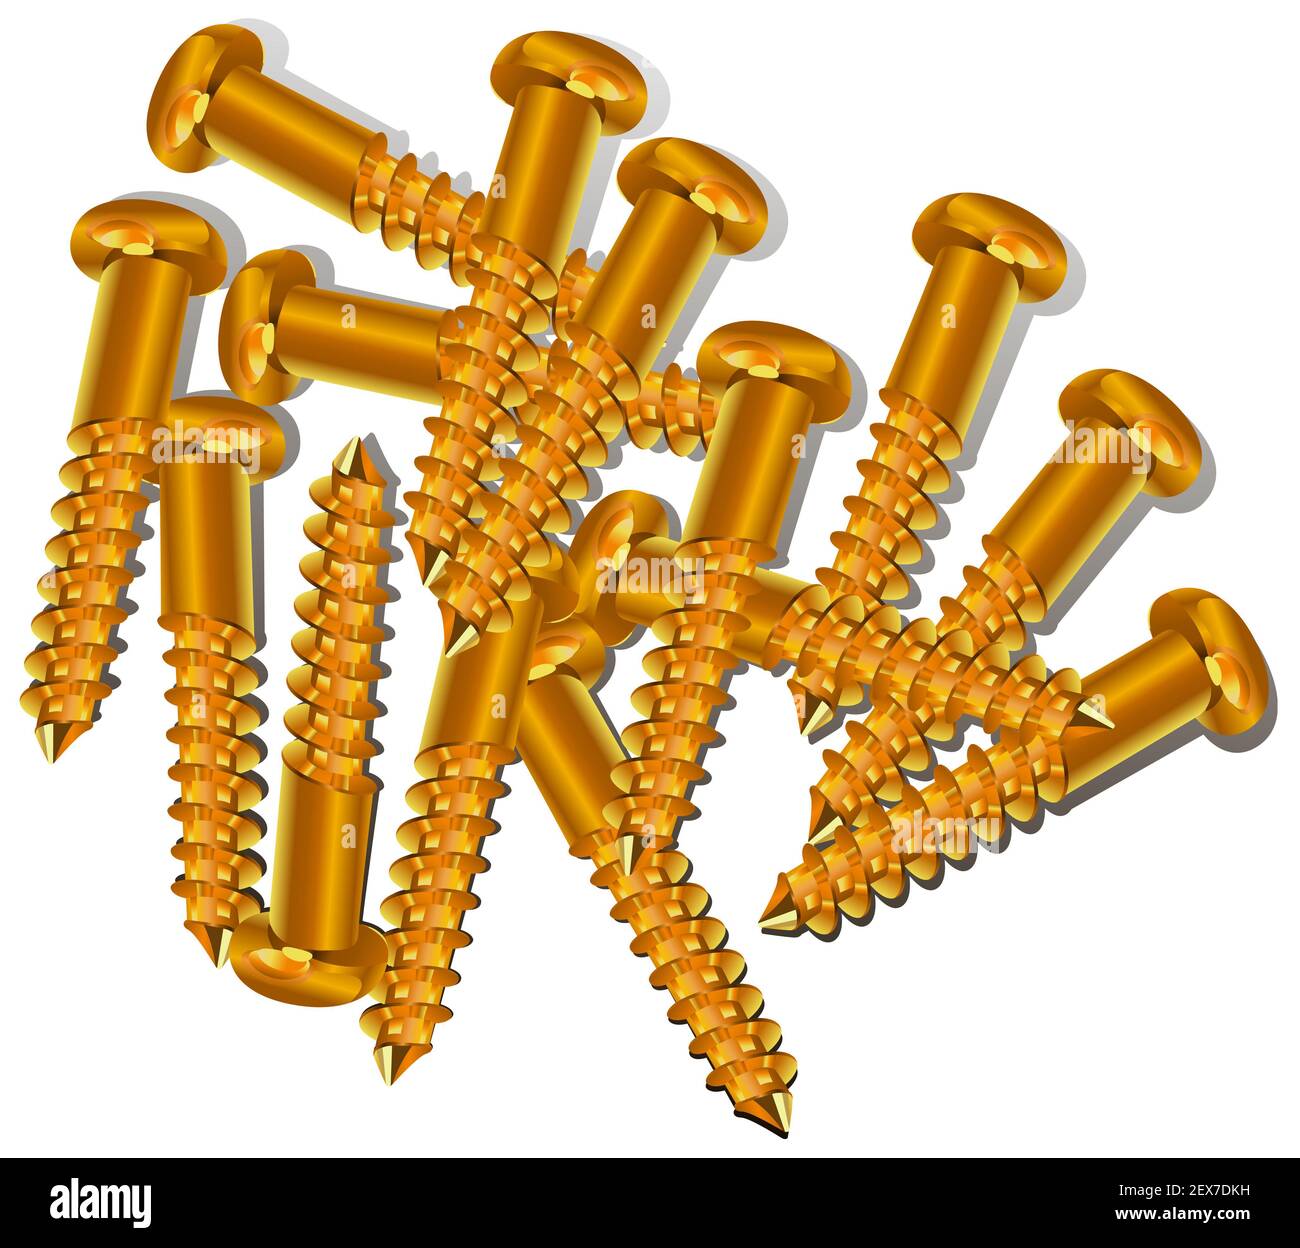 Hill of new screws Stock Photo